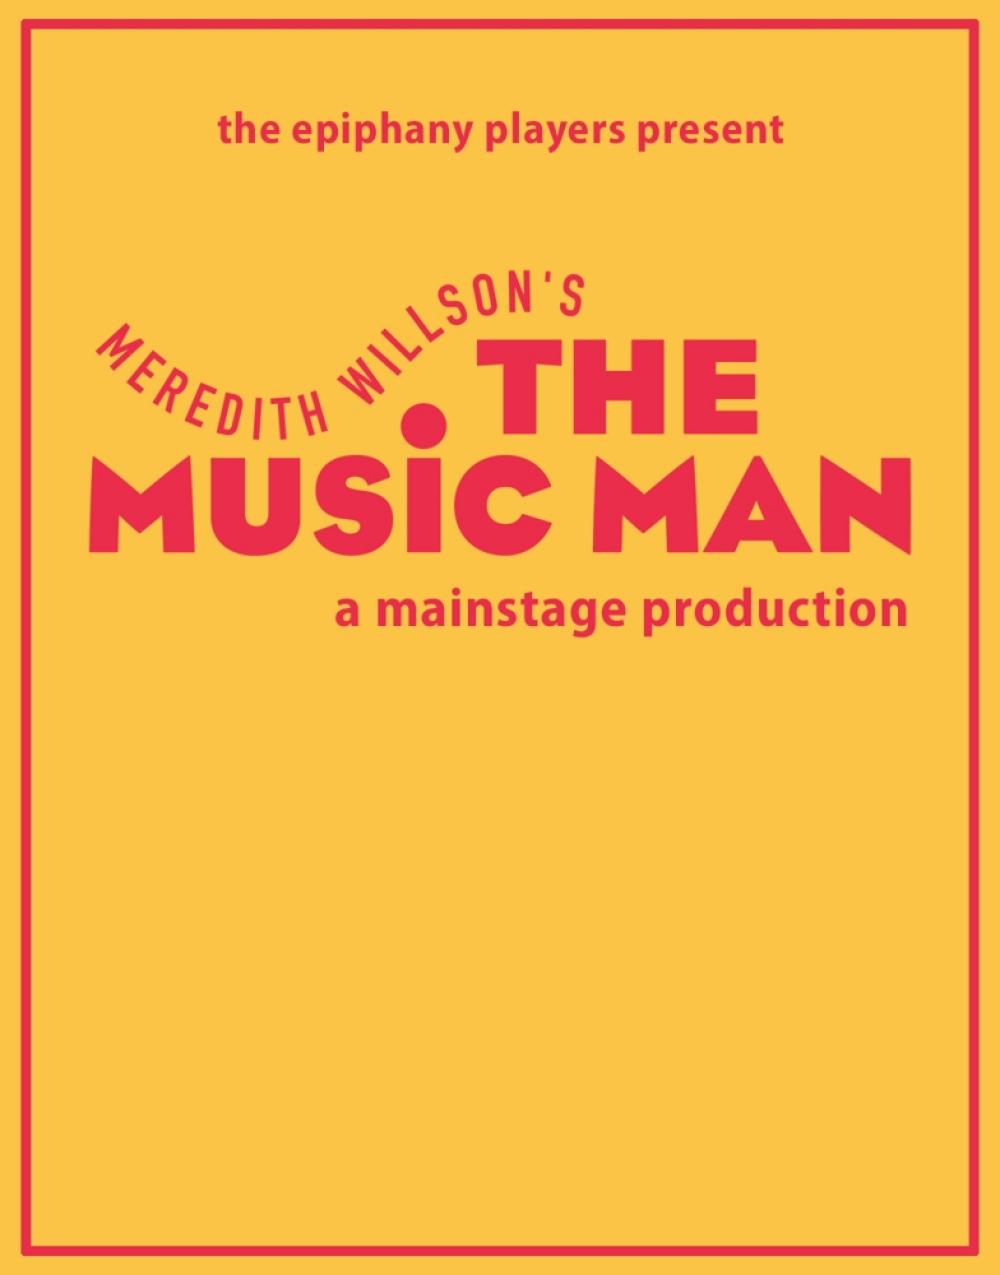 The Music Man - The Epiphany Players Stage Mag